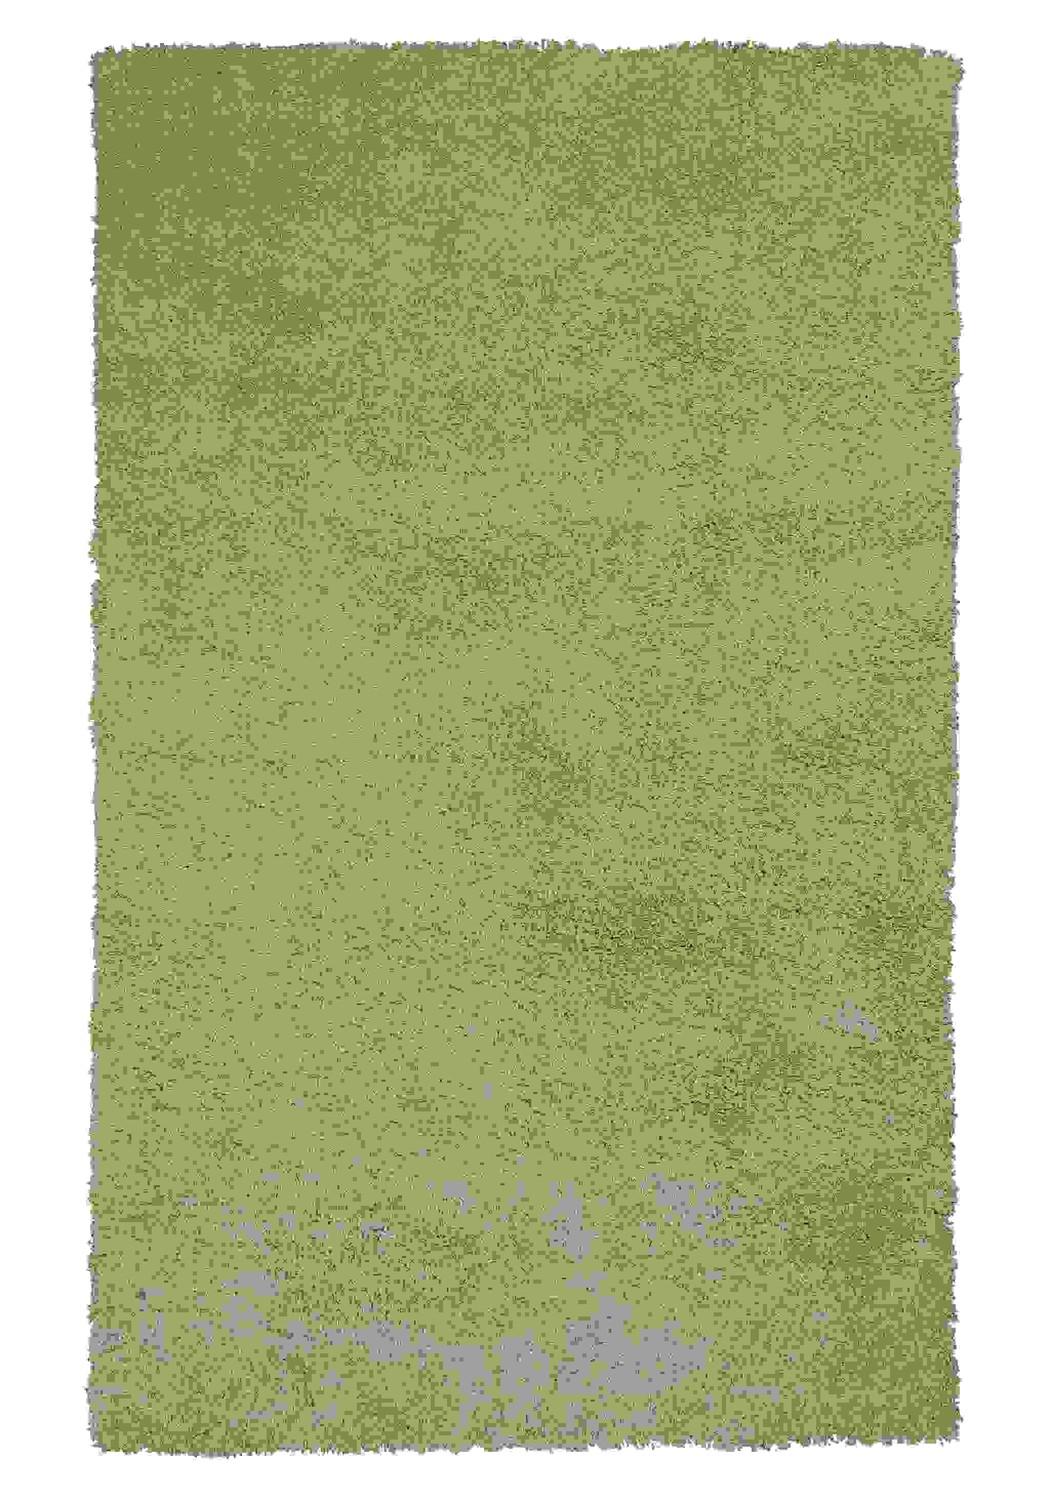 9' x 13' Polyester Spearmint Green Area Rug